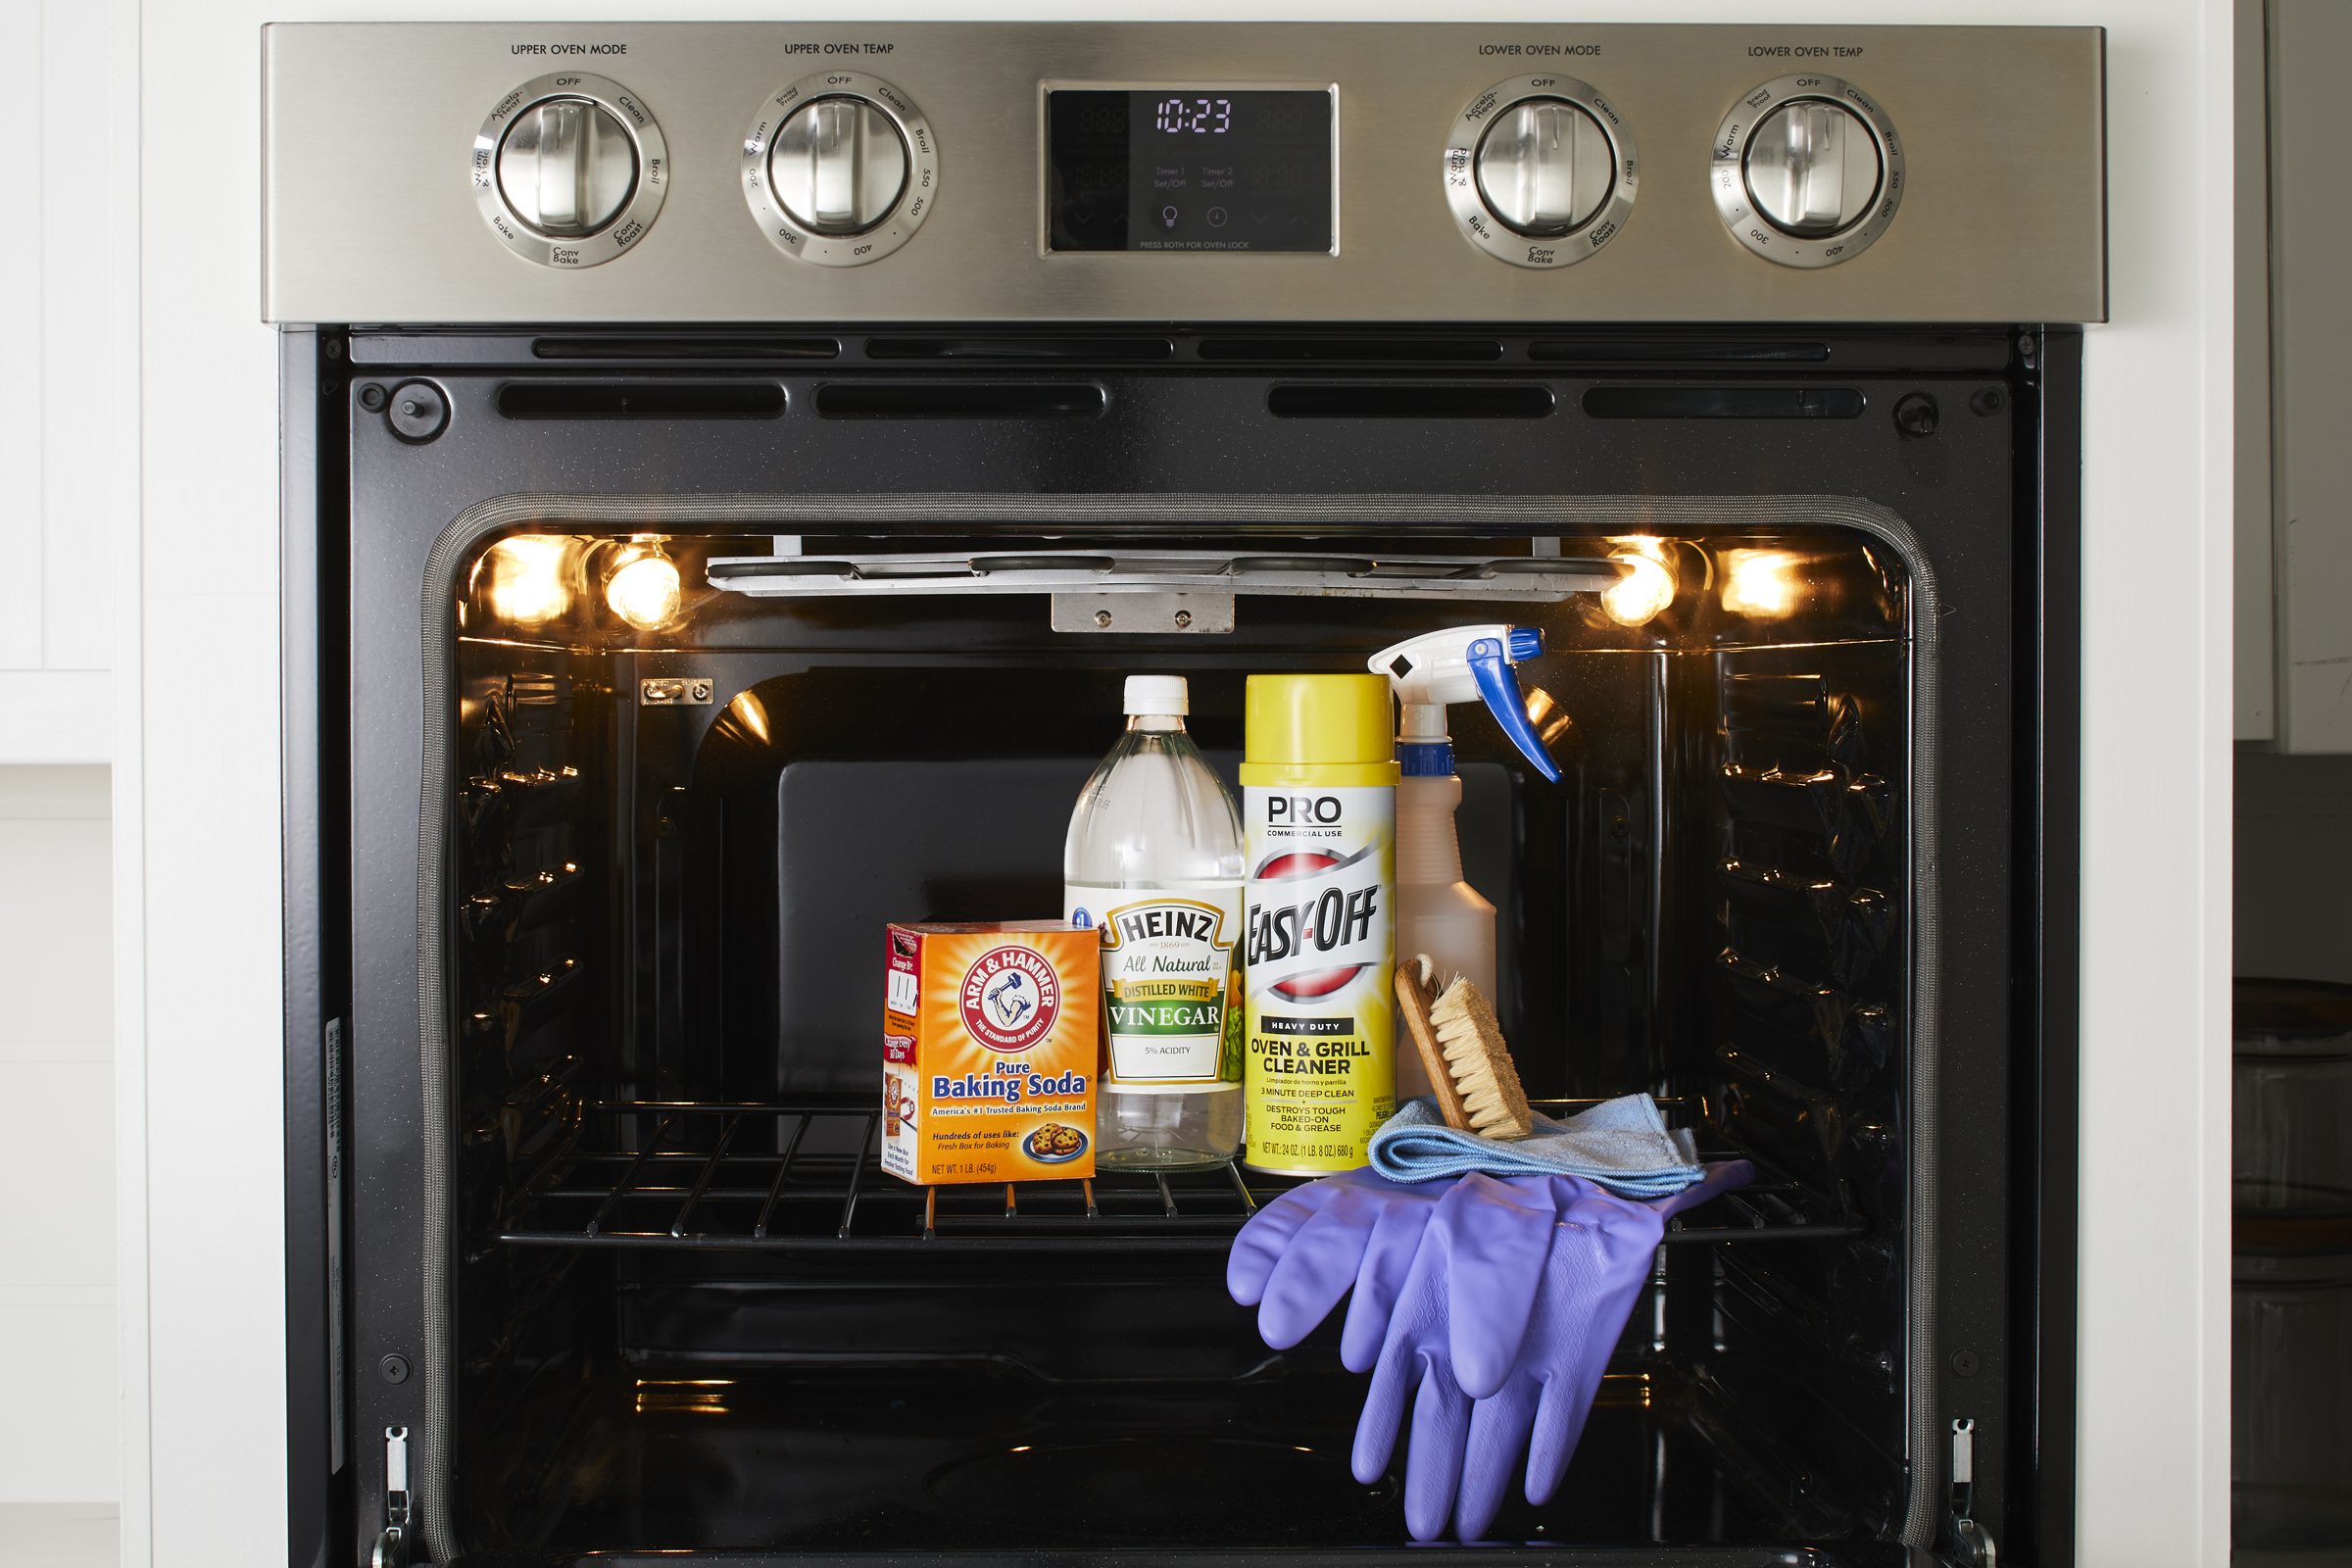 How to Clean Inside an Oven